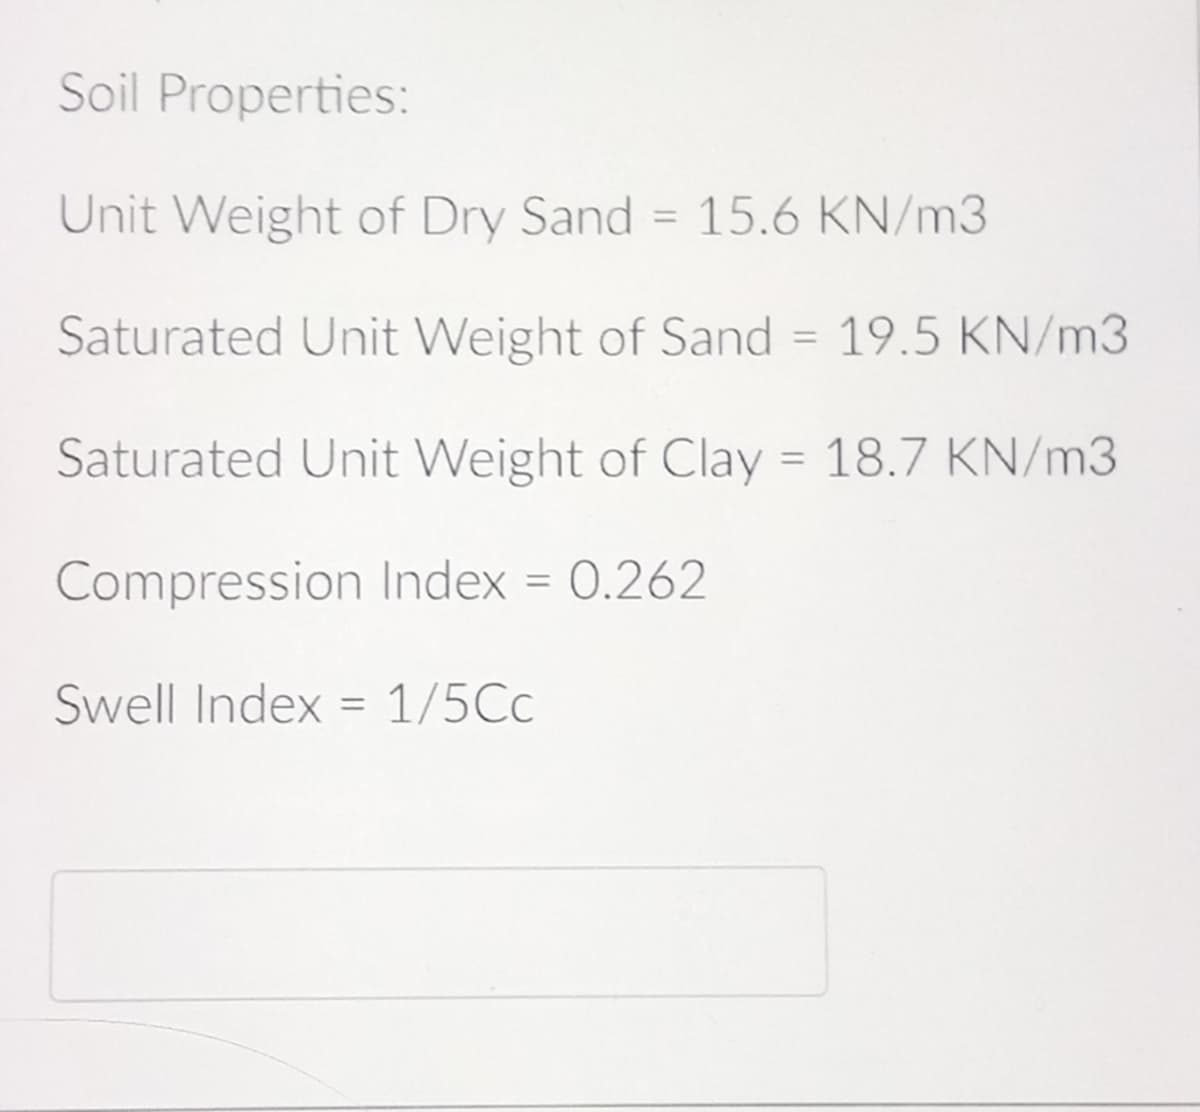 Soil Properties:
Unit Weight of Dry Sand= 15.6 KN/m3
Saturated Unit Weight of Sand = 19.5 KN/m3
Saturated Unit Weight of Clay = 18.7 KN/m3
Compression Index = 0.262
Swell Index = 1/5Cc